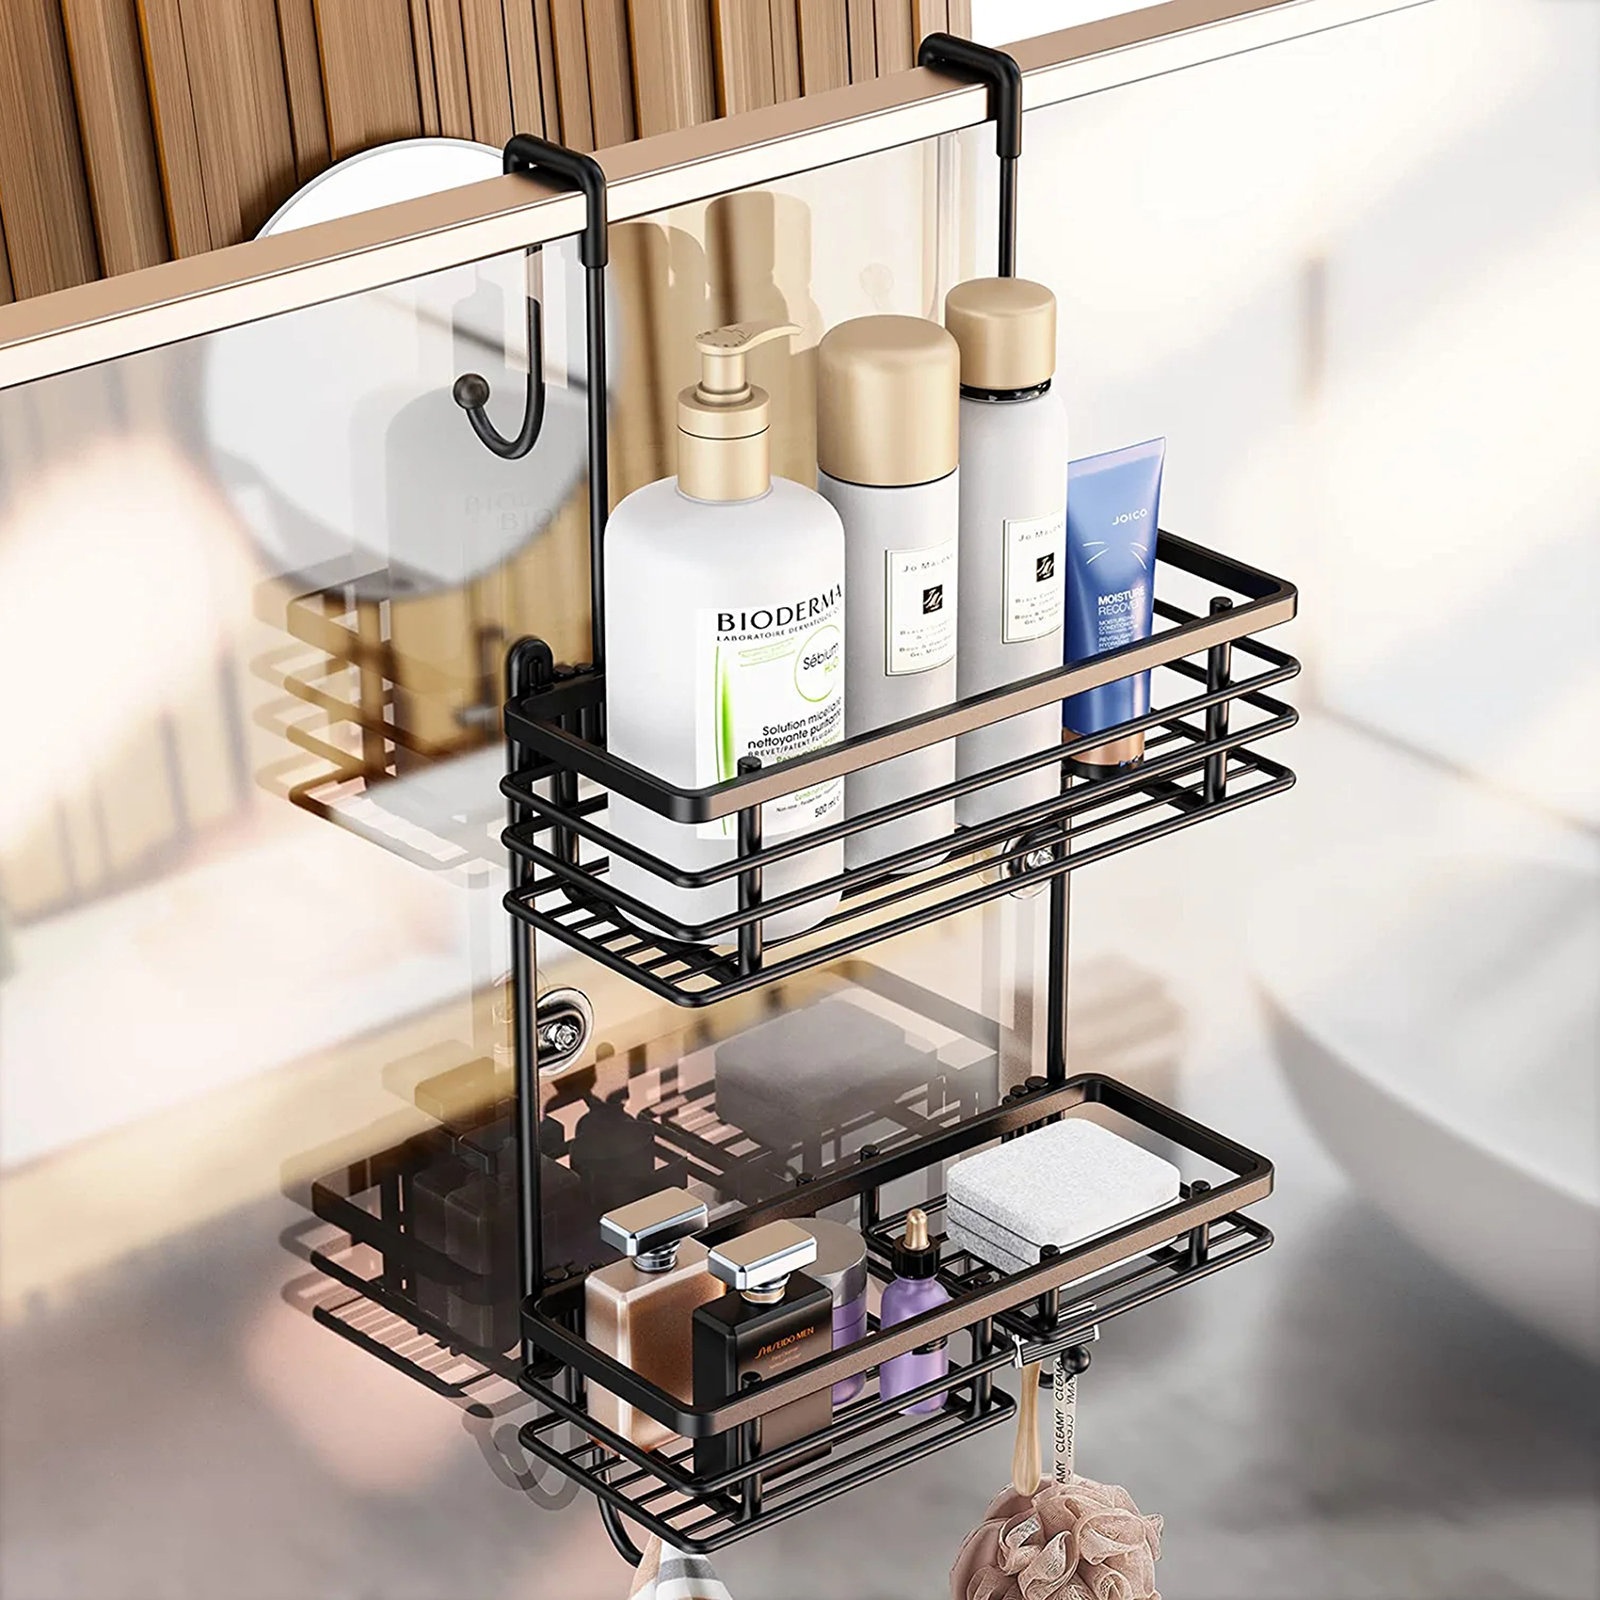 Shower Caddy Hanging Shelf with Hooks Suction Cups Stainless